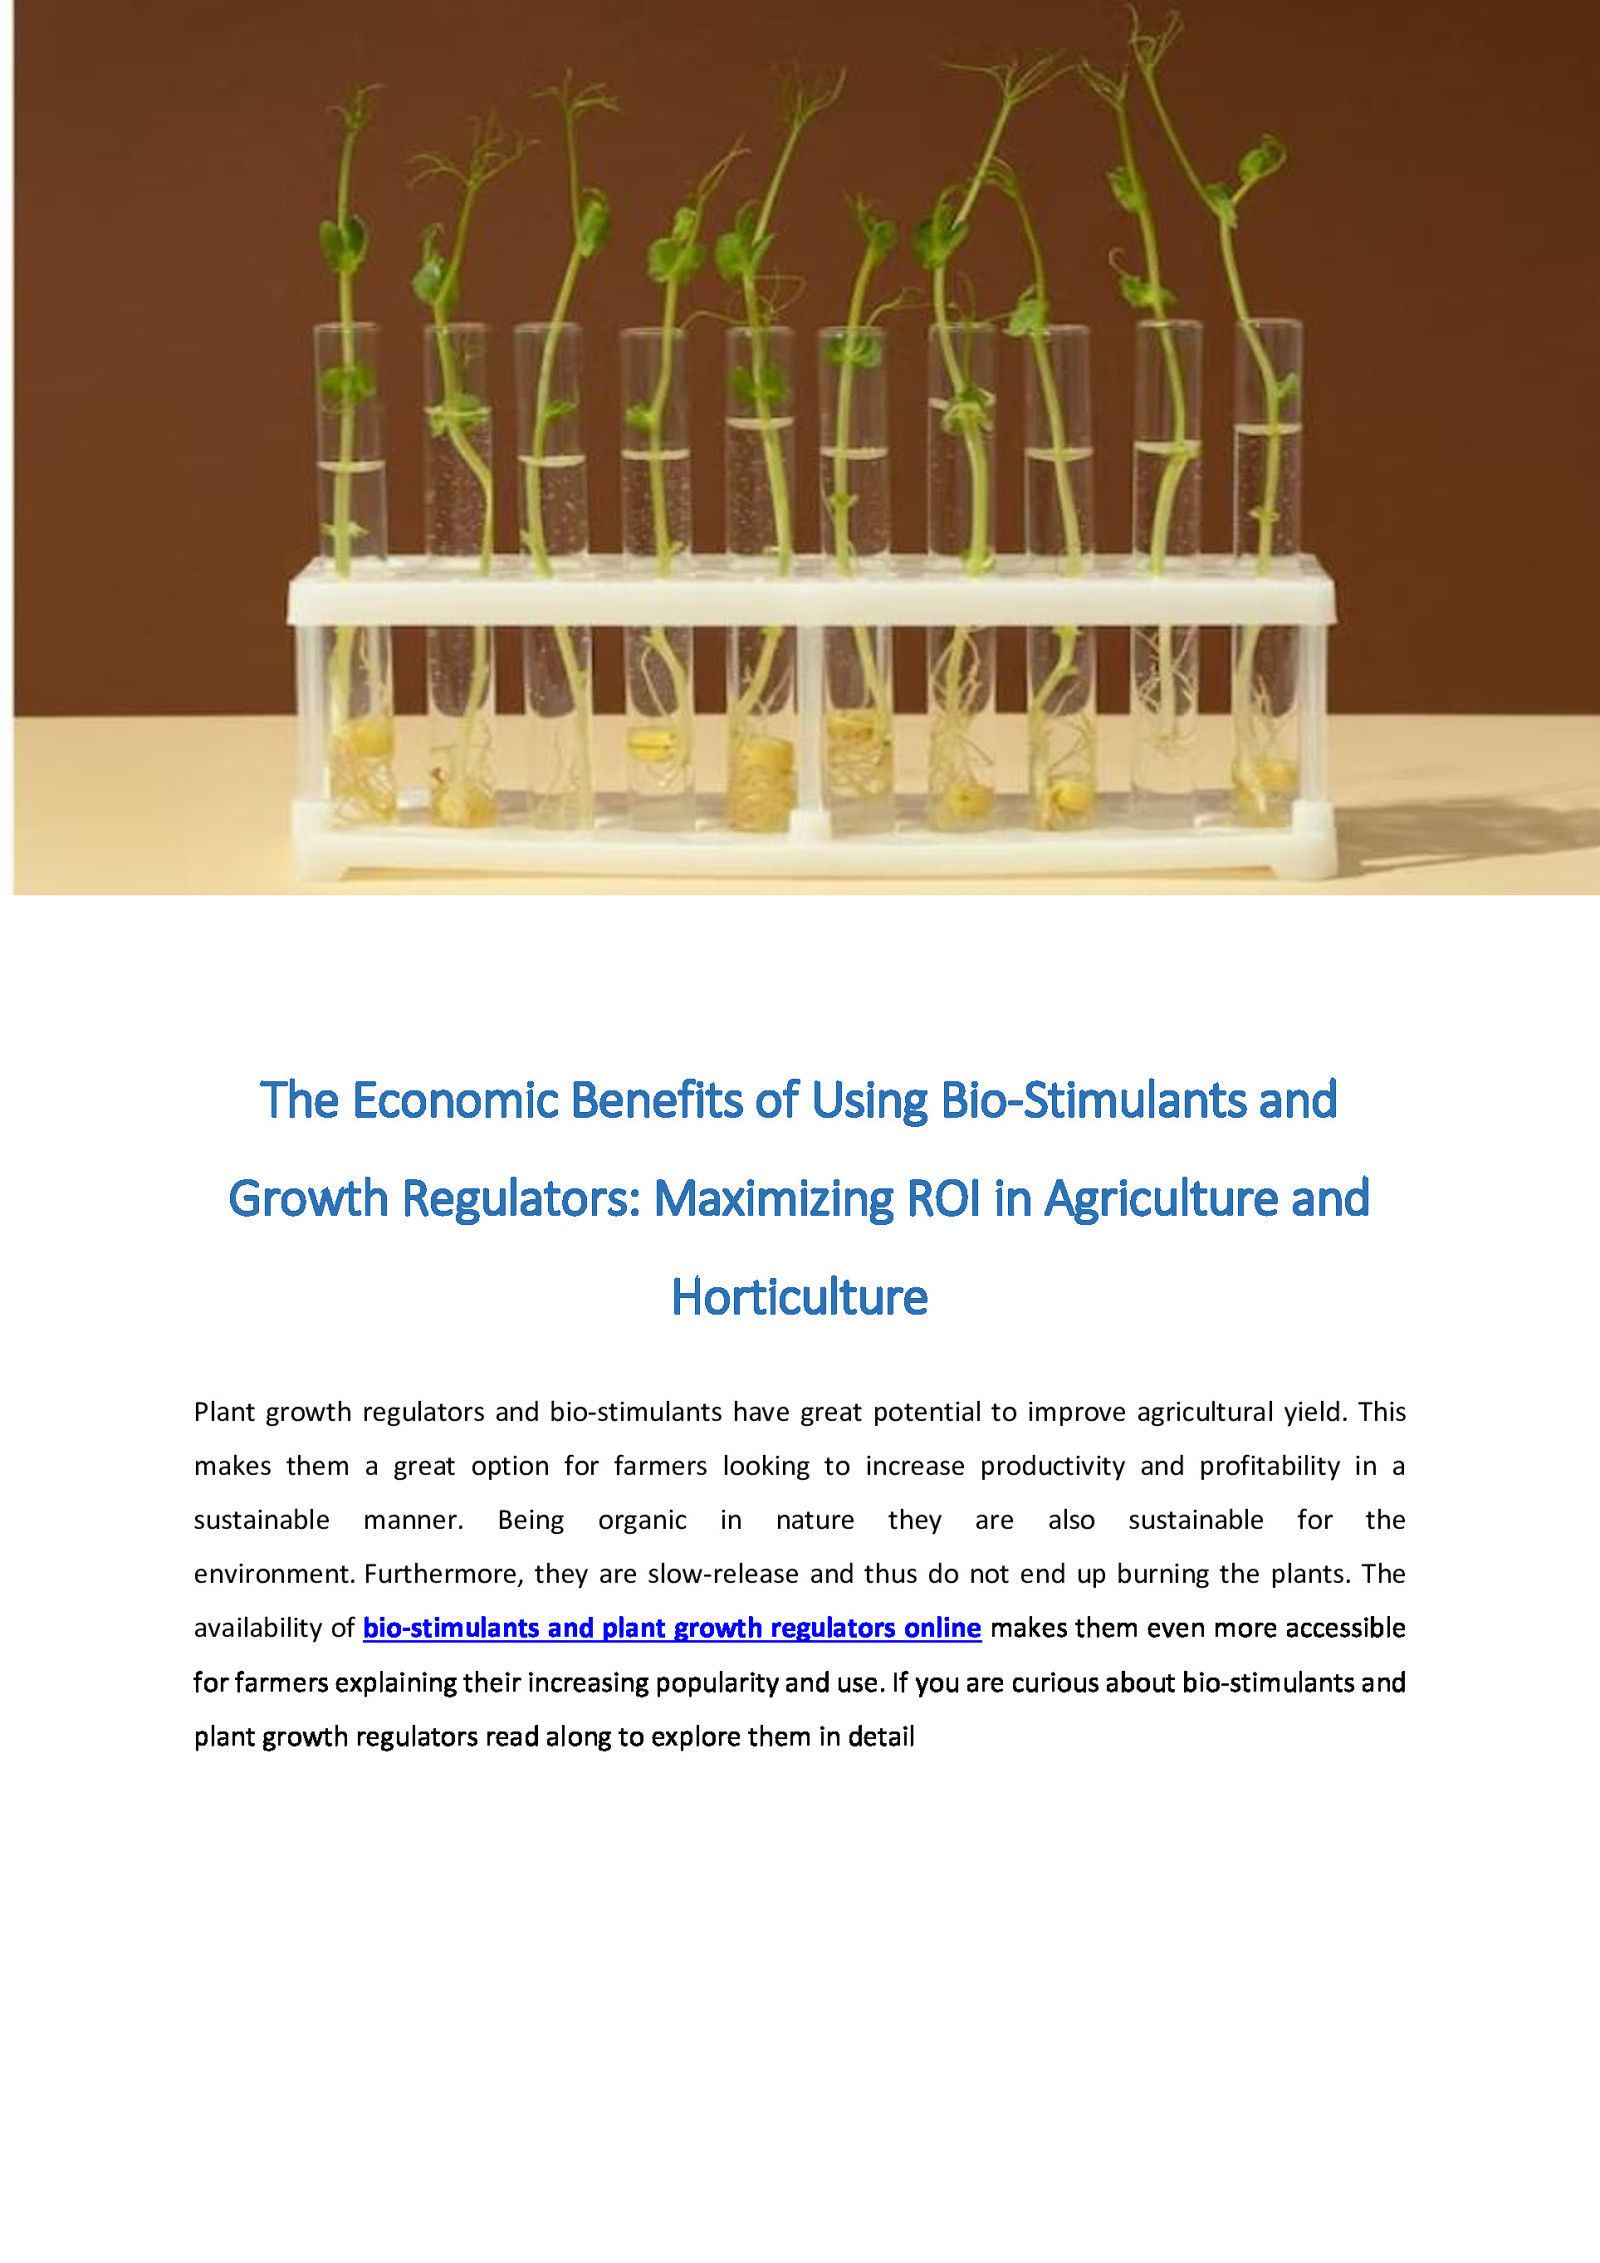 The Economic Benefits of Using Biostimulants and Growth Regulators: Maximizing ROI in Agriculture and Horticulture